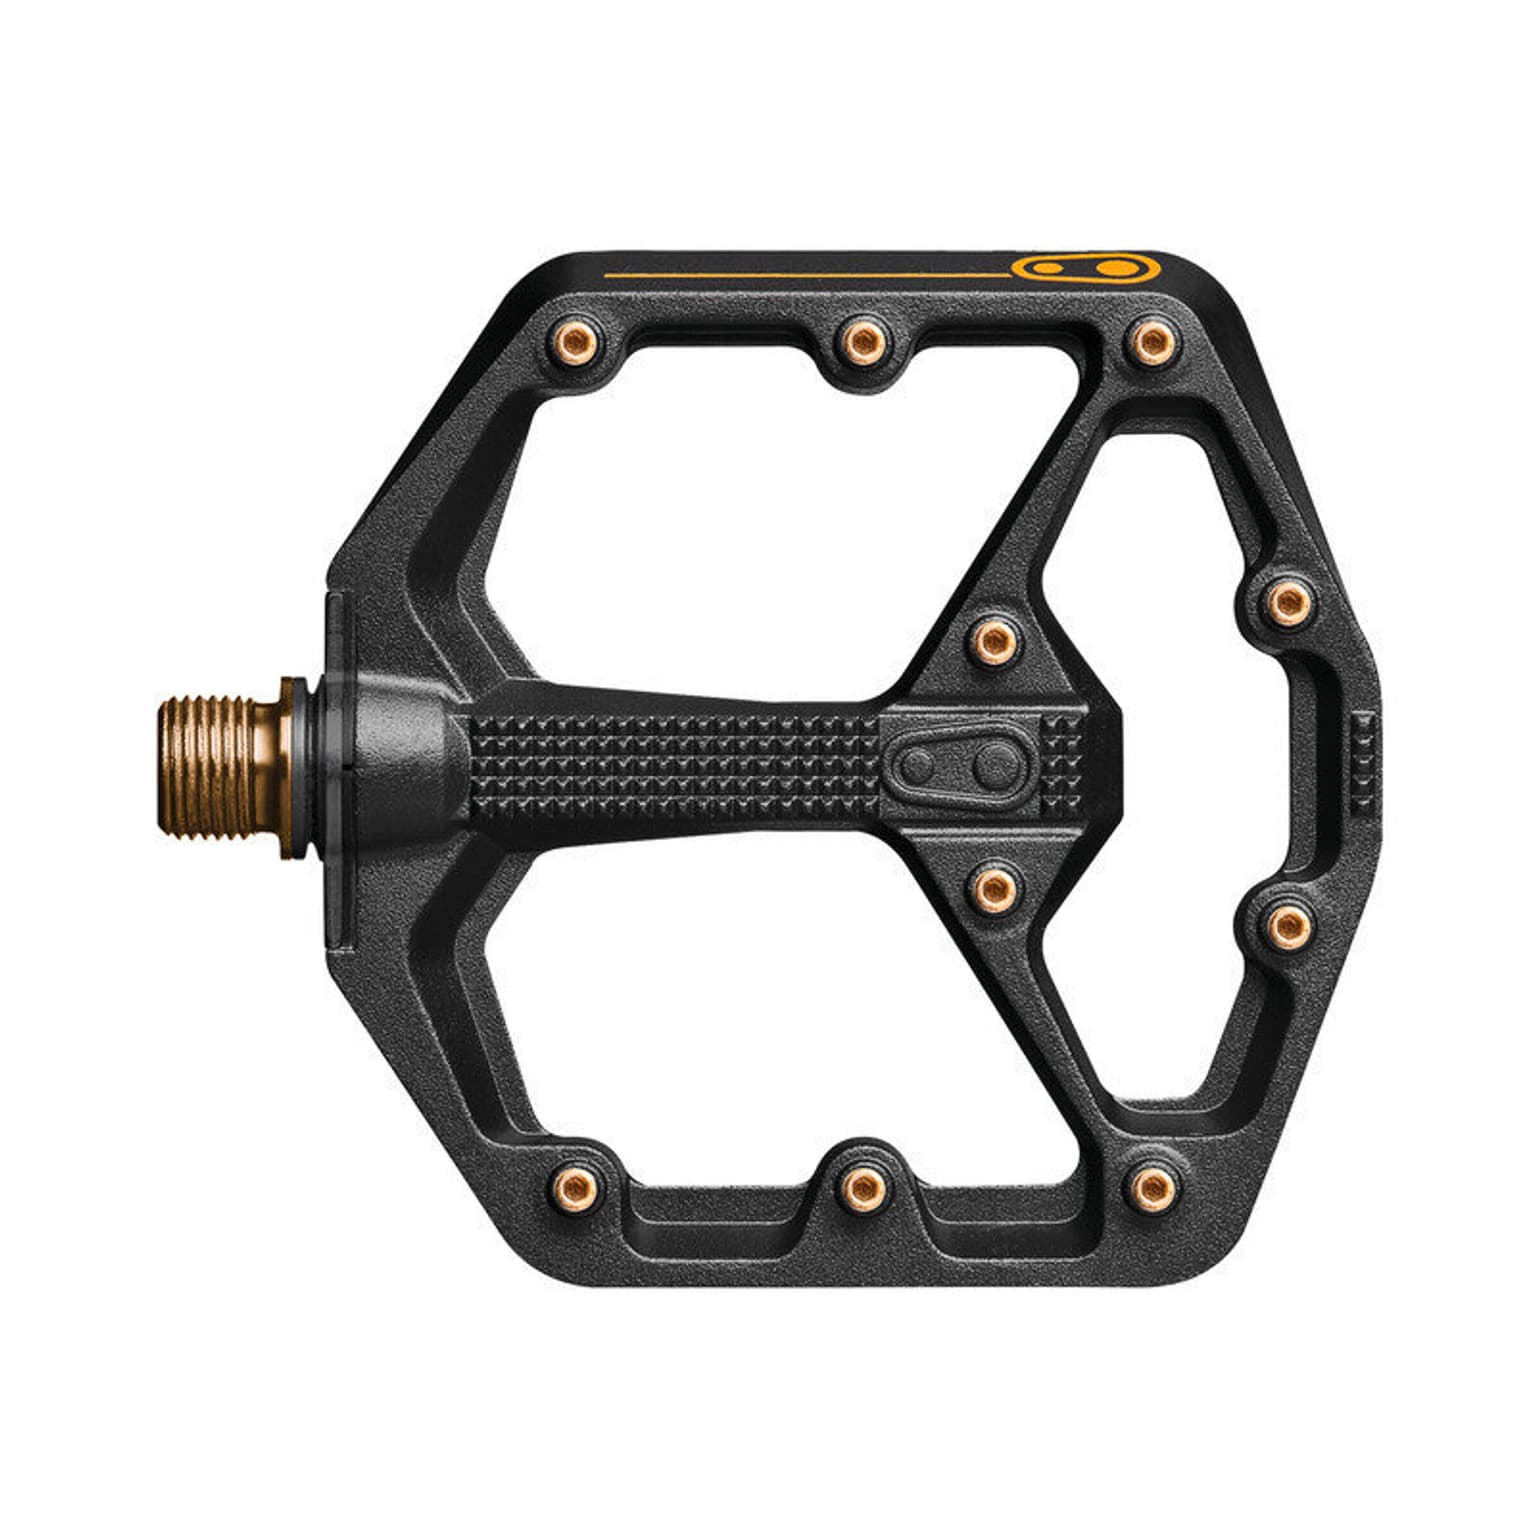 crankbrothers crankbrothers Pedal Stamp 11 small Pedale 1